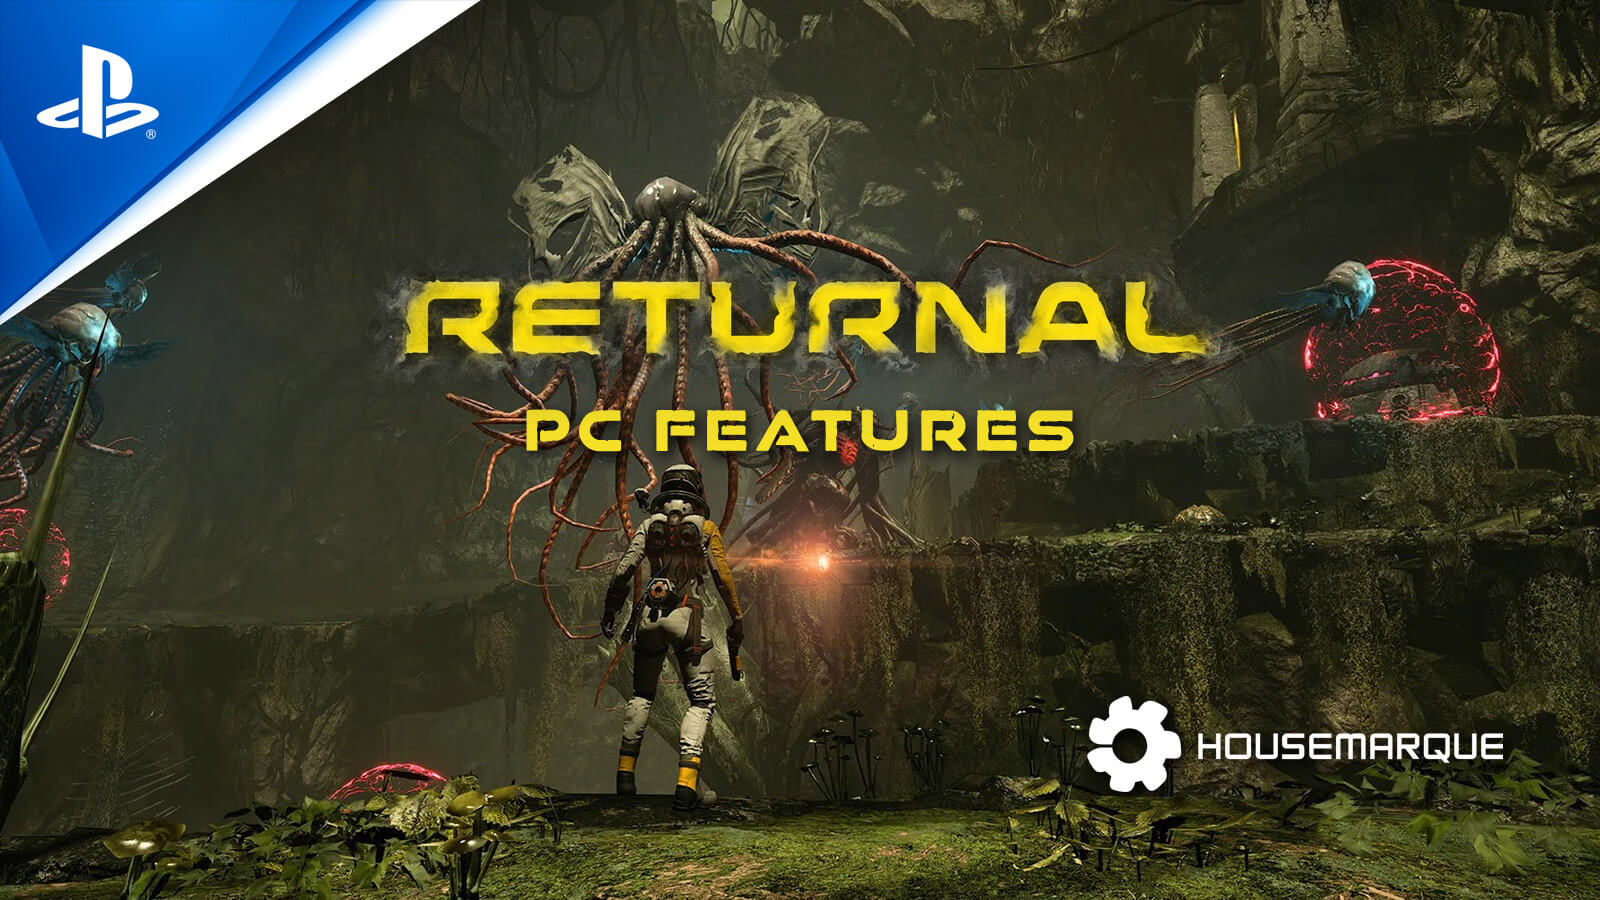 Returnal is Housemarque's new PS5 shooter